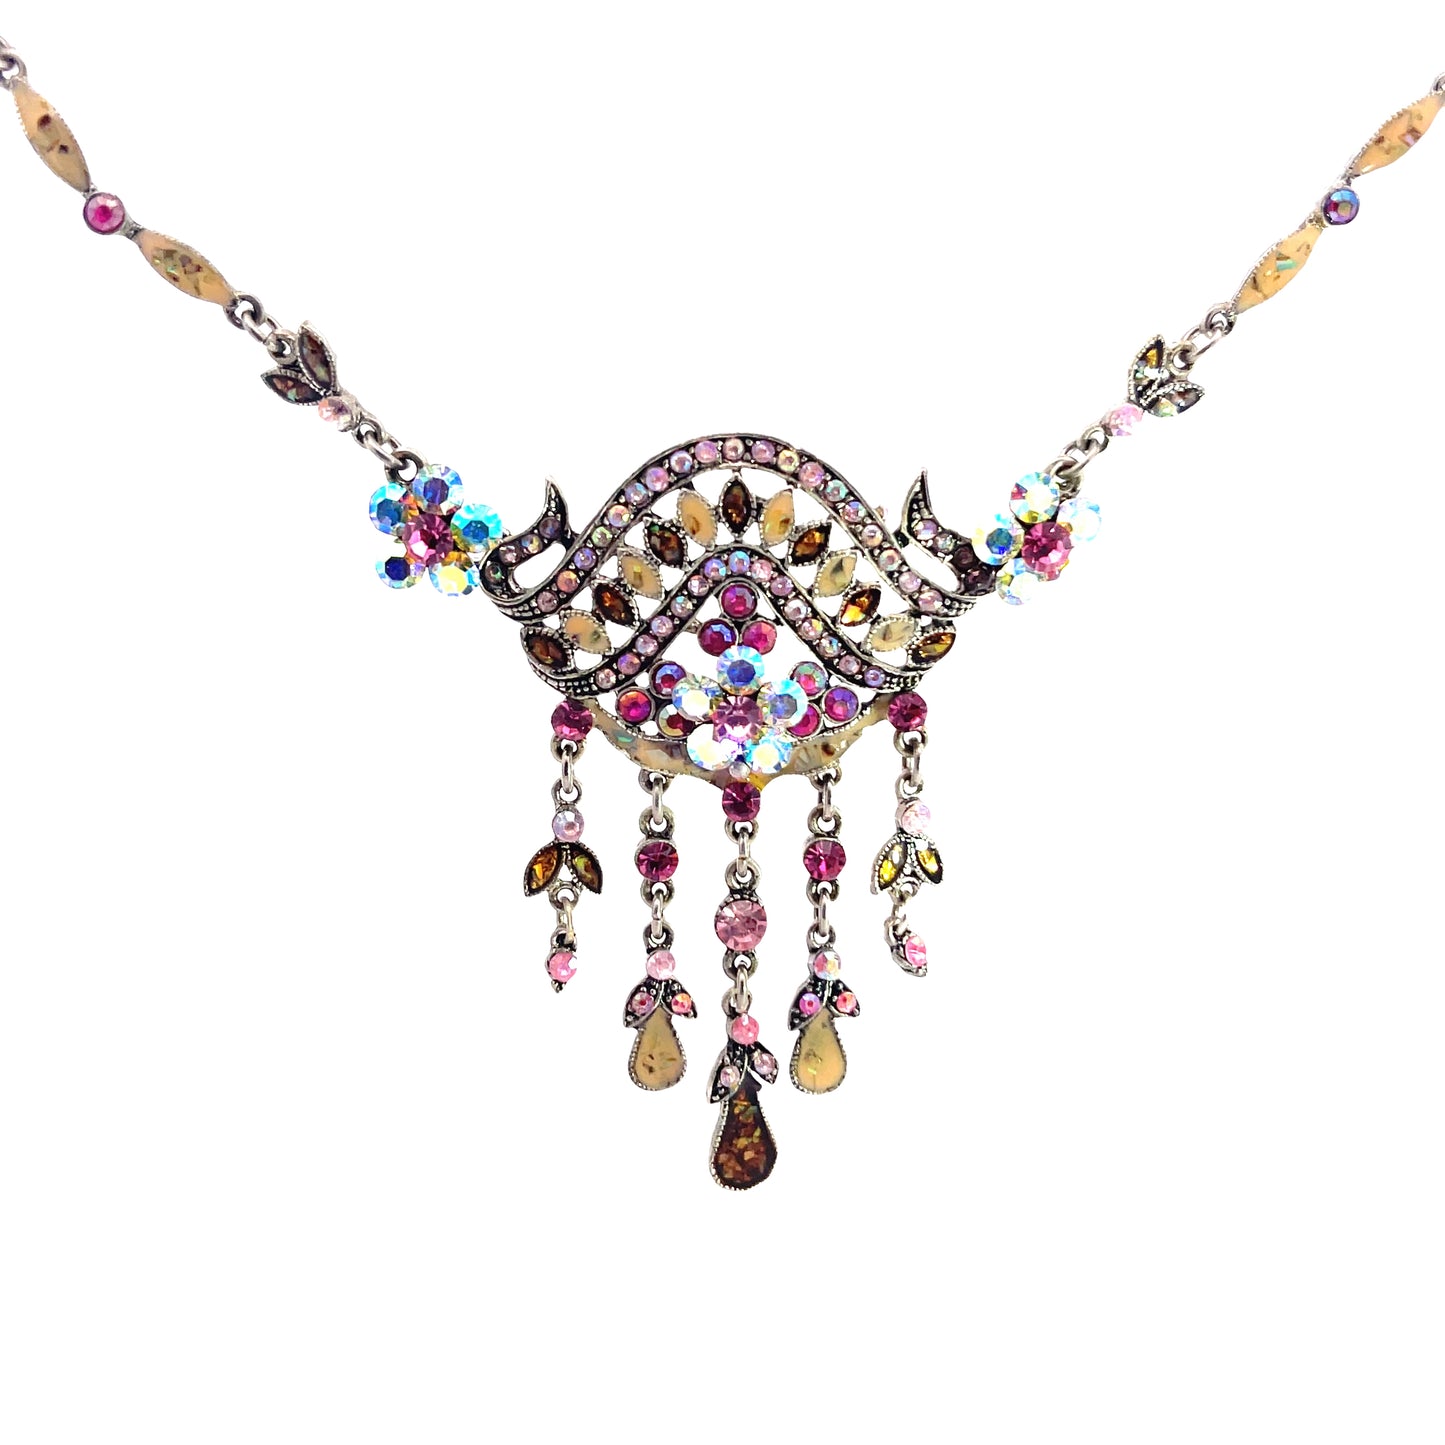 Multicolor Crystal Fringe Necklace - Born To Glam